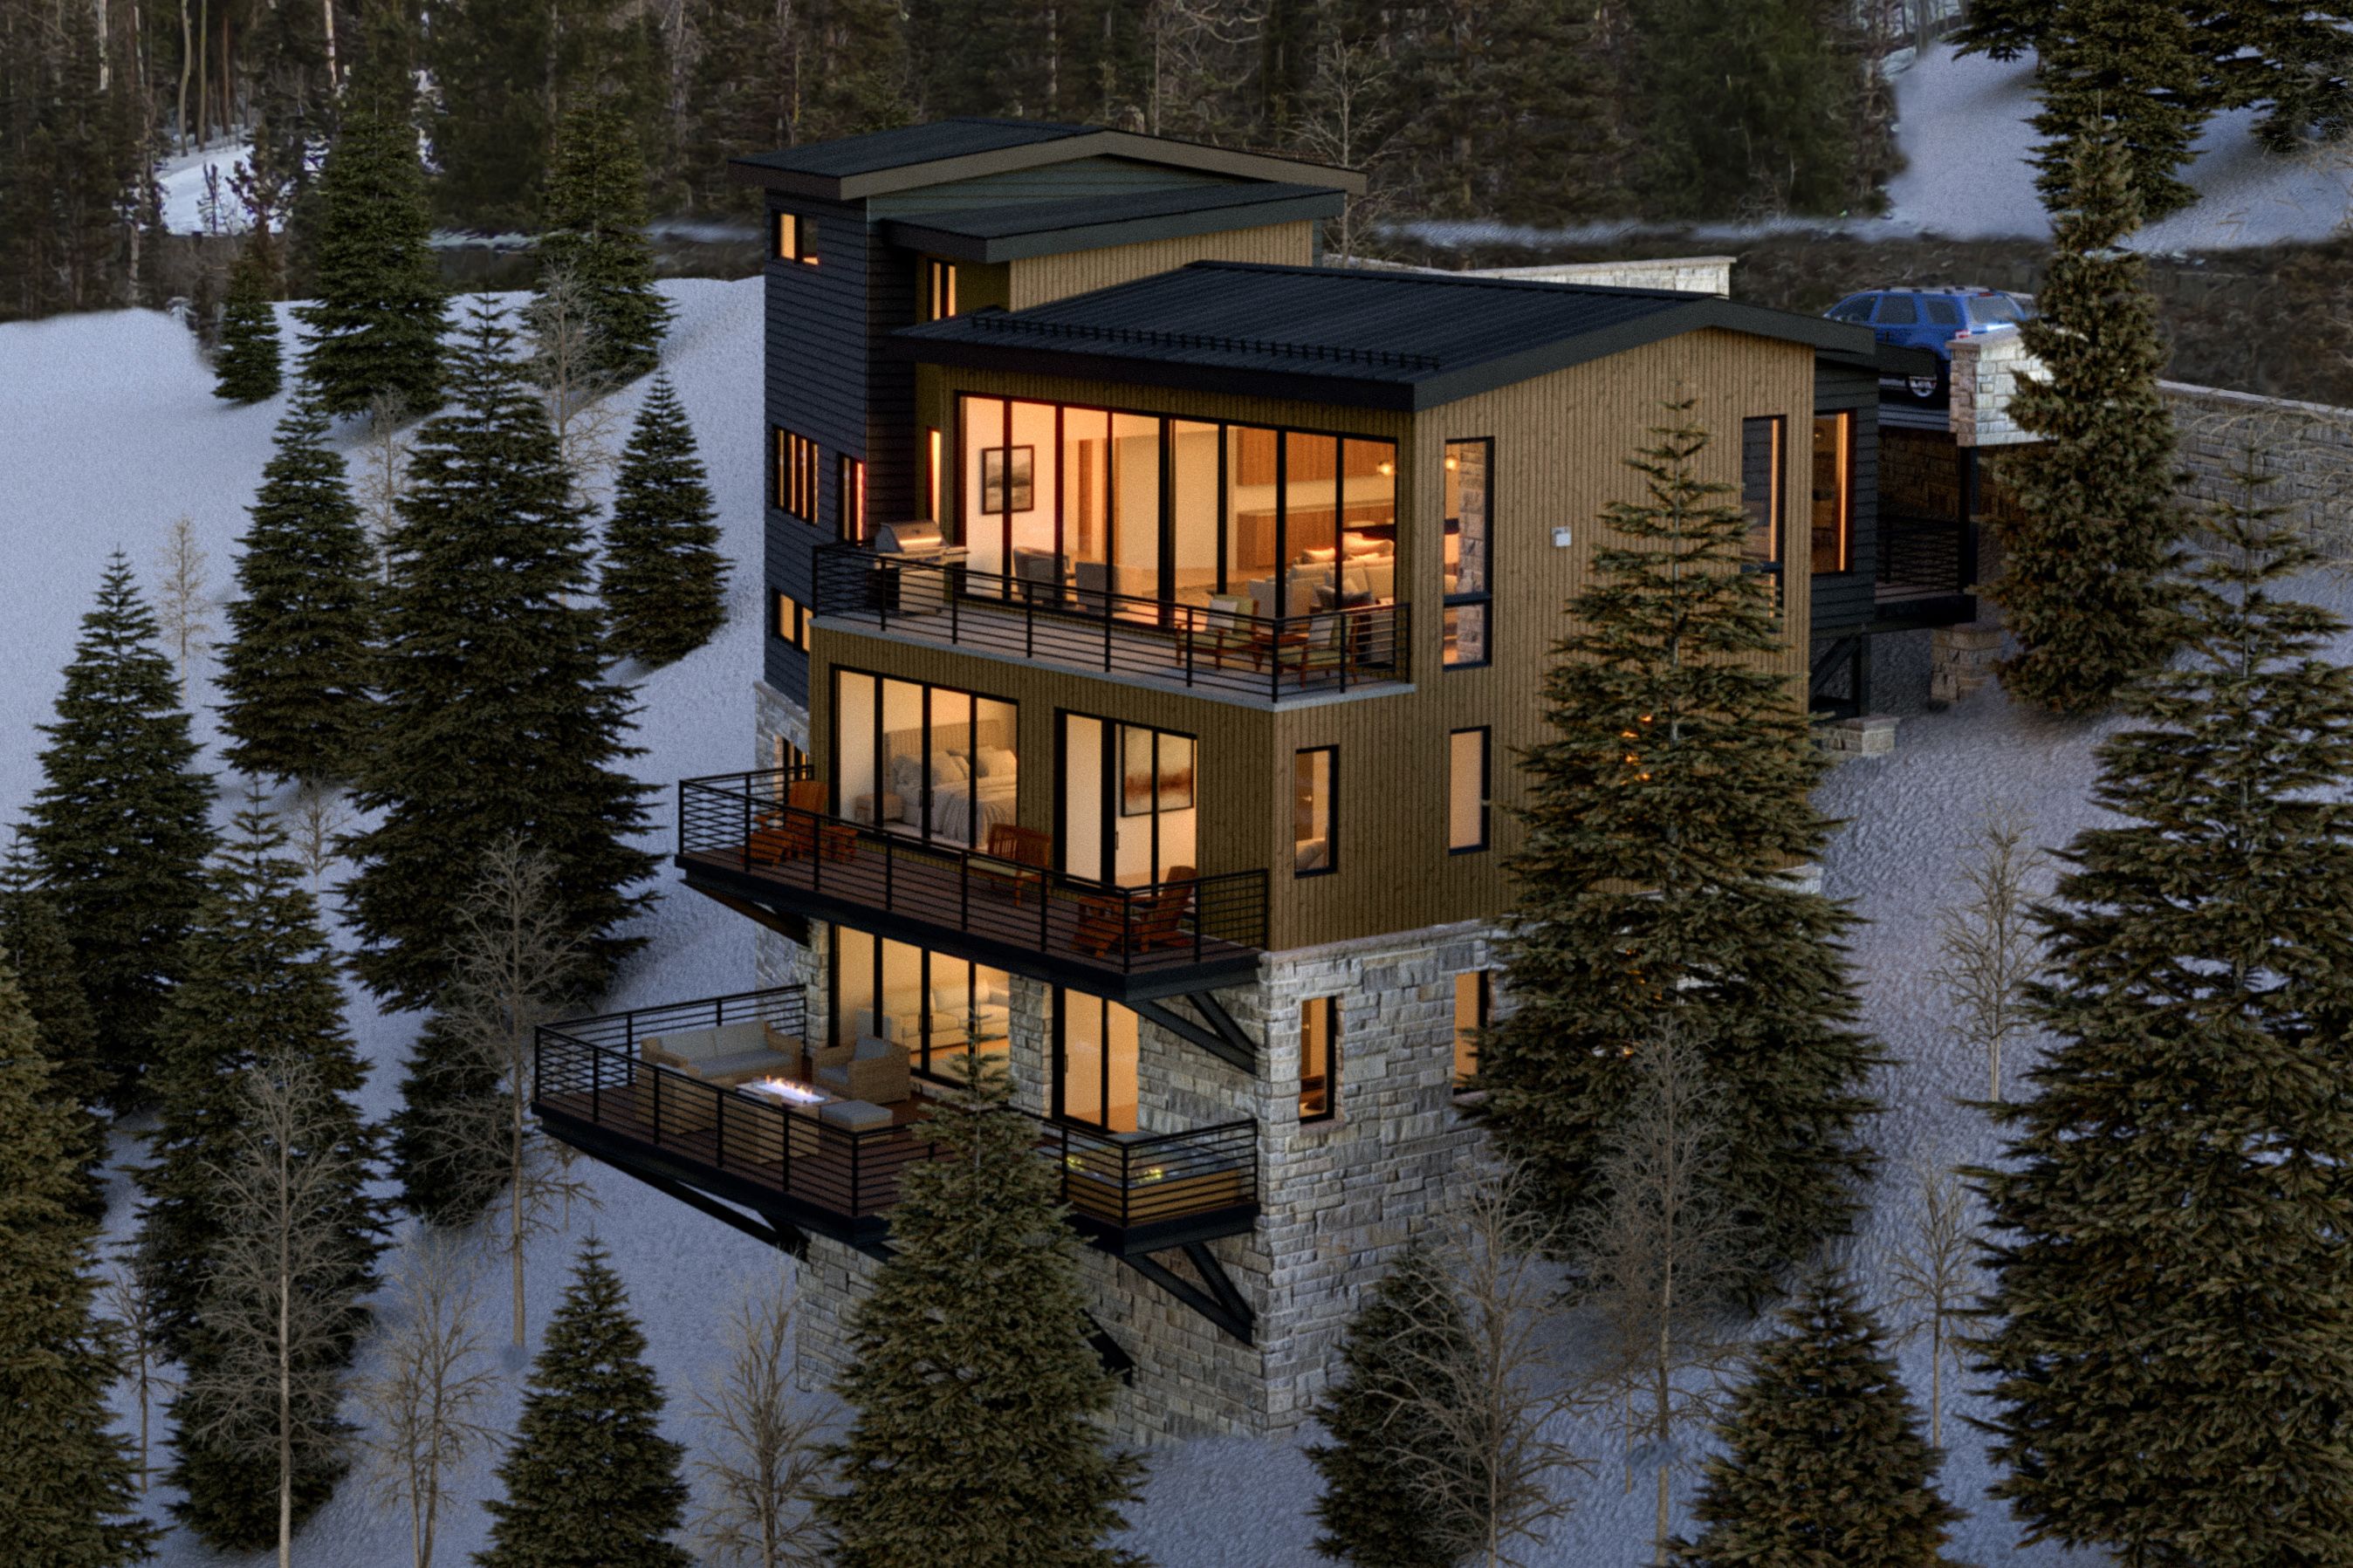 Outstanding Views and Easy Ski Access